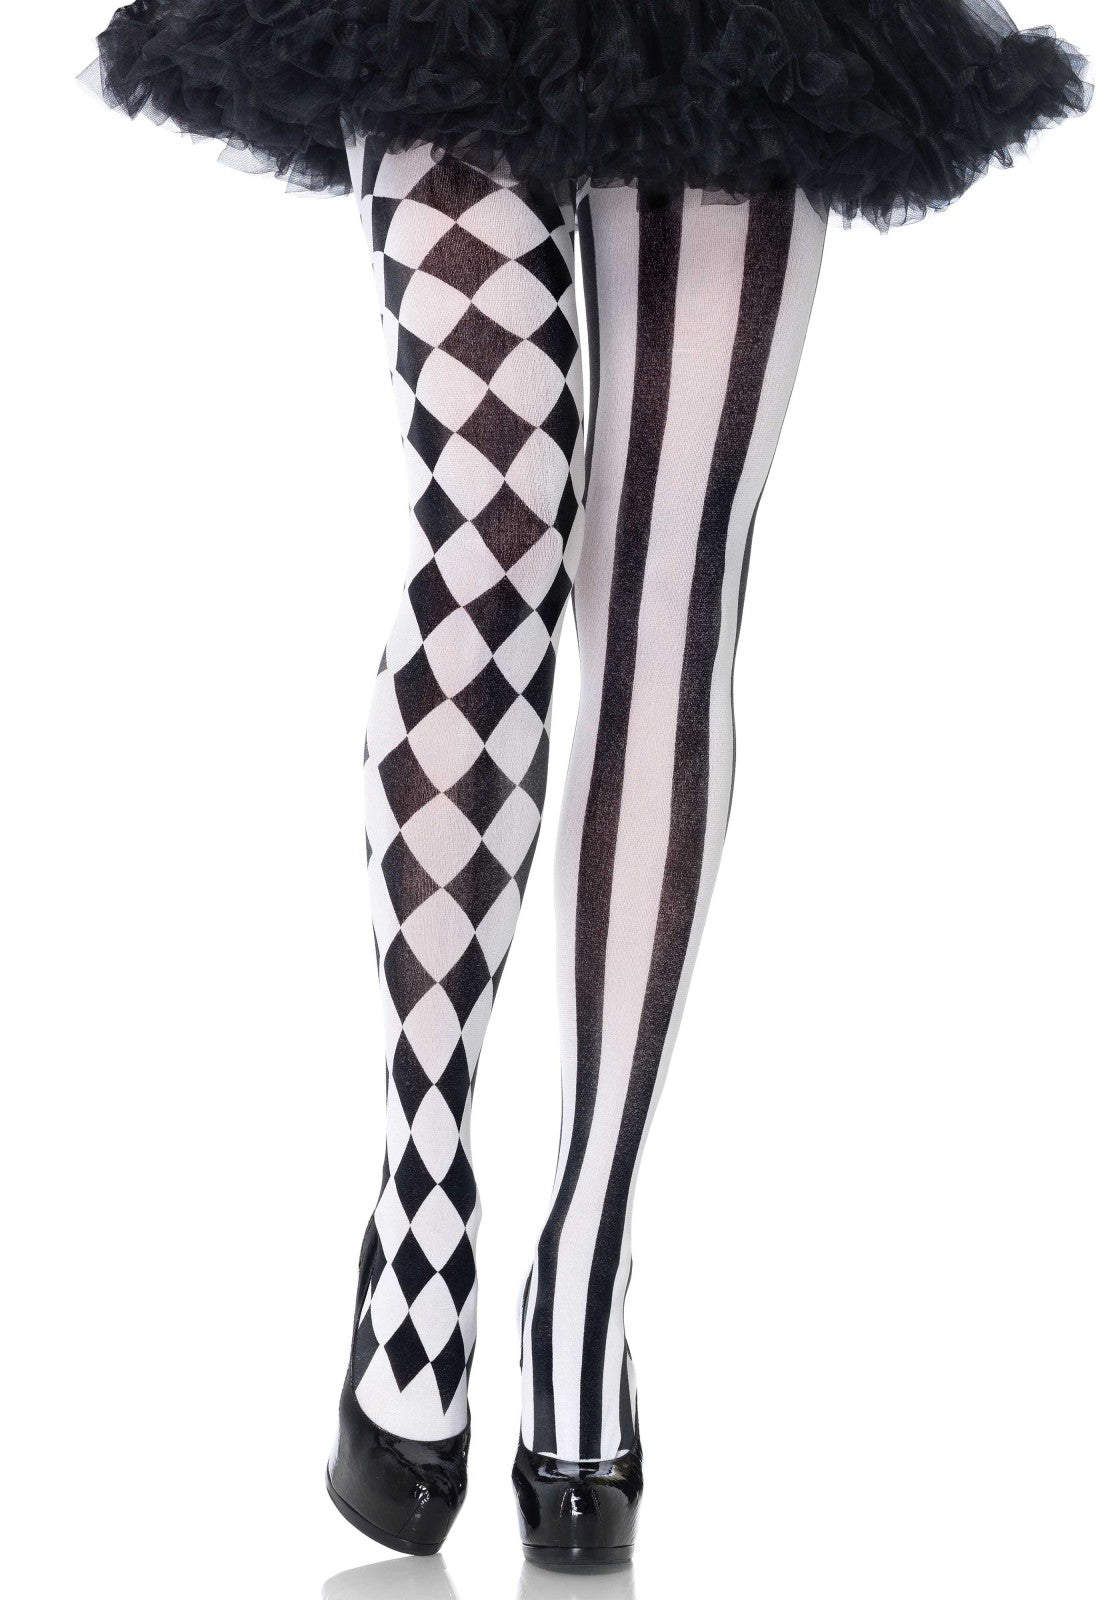 Leg Avenue 7720 Harlequin Tights - White opaque tights with a black print, one leg has vertical stripes and the other is a checkered pattern. Perfect for Halloween.